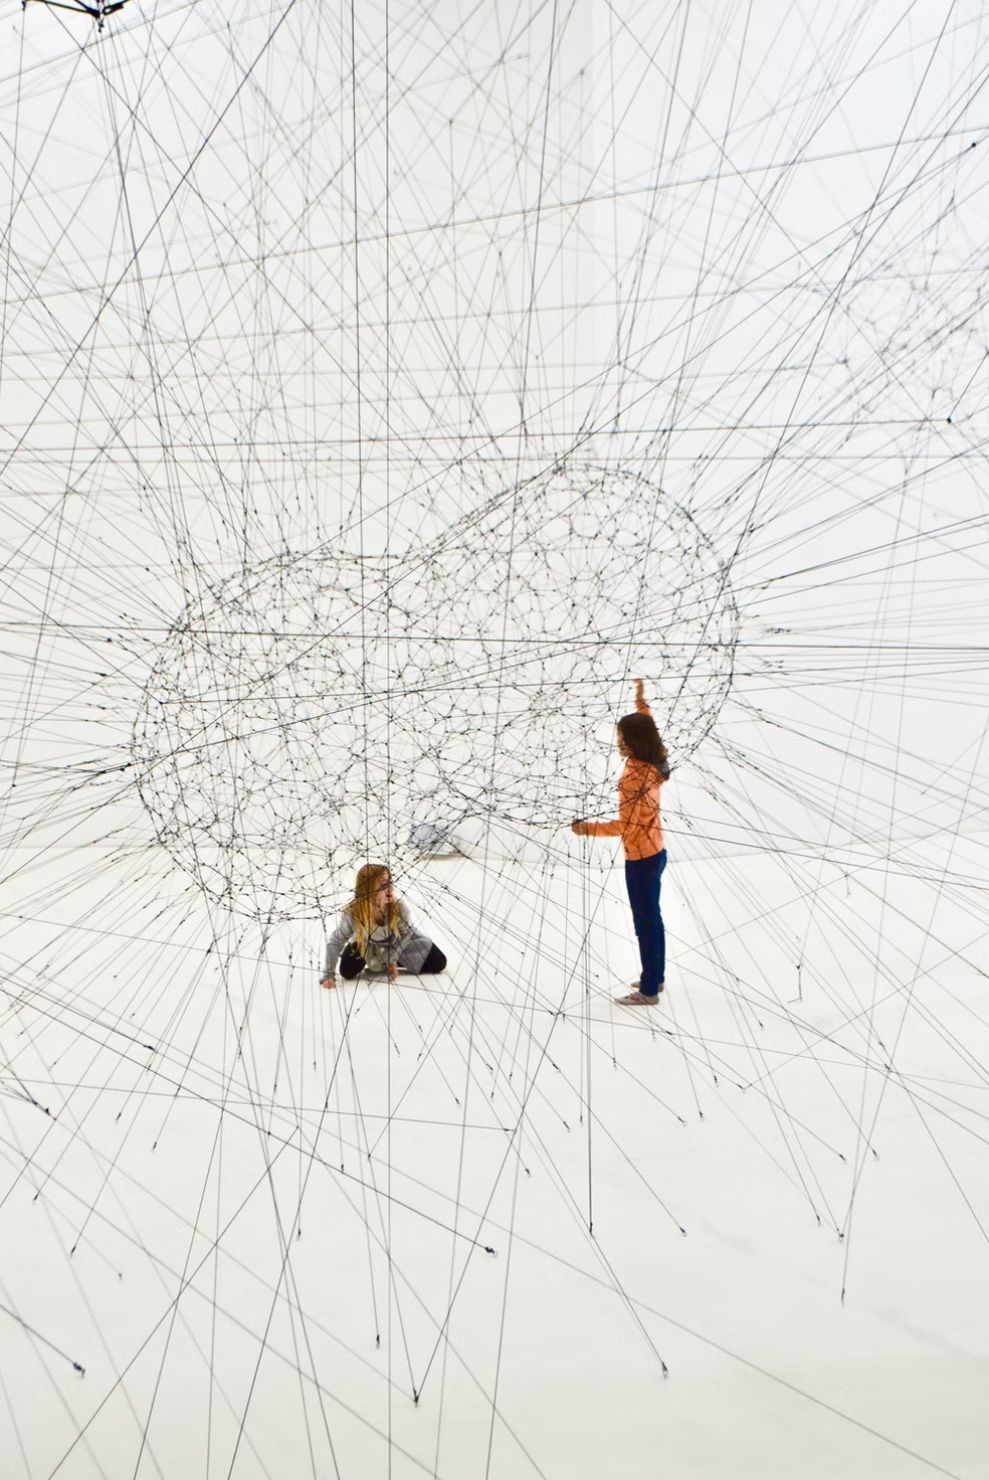 Two children from different cultures play together inside an art installation made of criss-crossing threads.